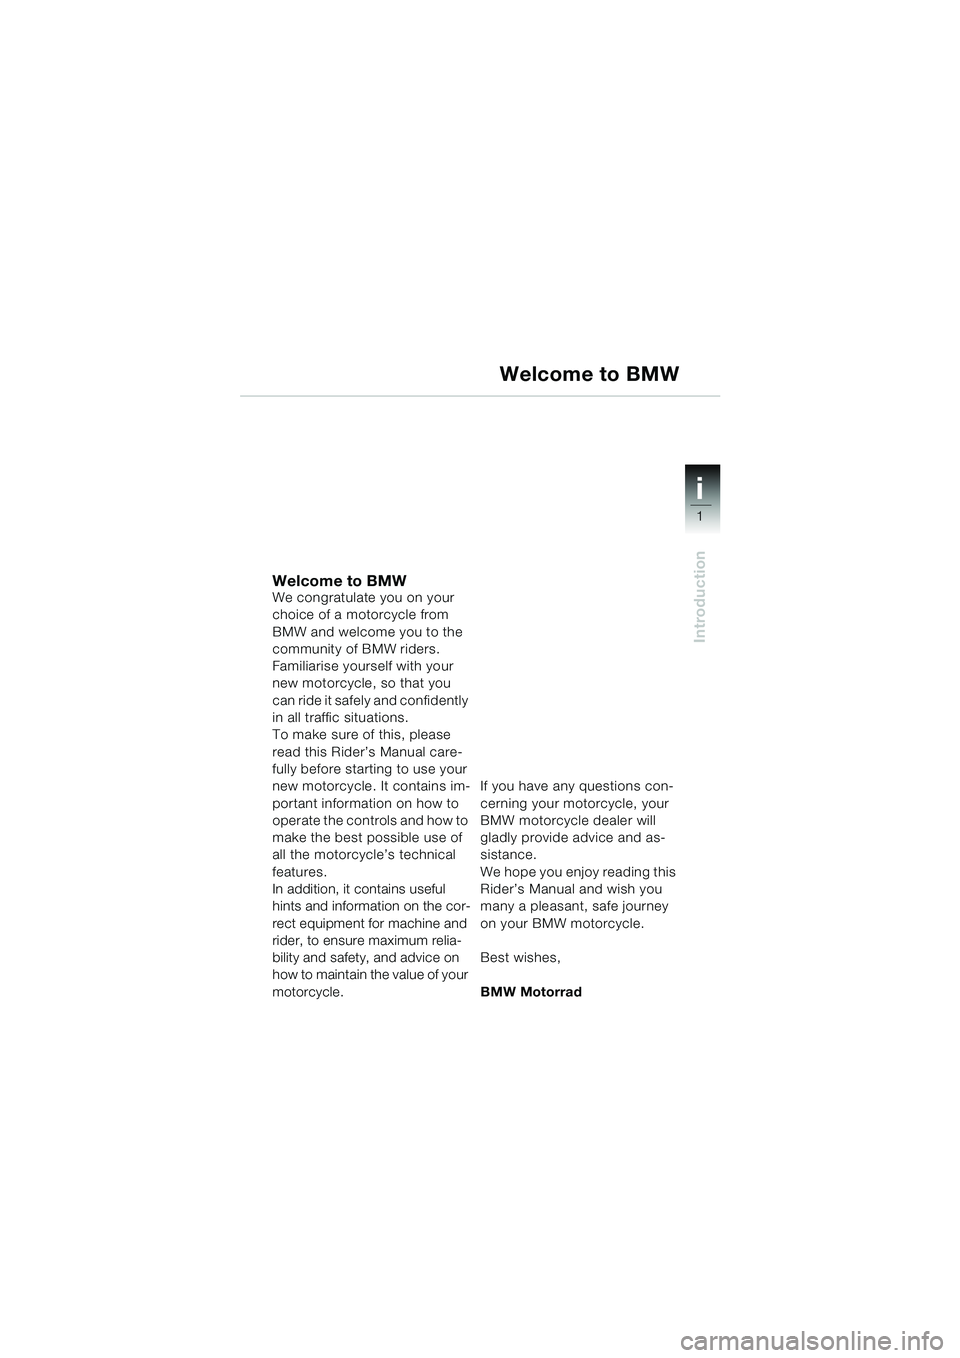 BMW MOTORRAD F 650 CS 2003  Riders Manual (in English) 1
Introduction
i
Welcome to BMWWe congratulate you on your 
choice of a motorcycle from 
BMW and welcome you to the 
community of BMW riders.
Familiarise yourself with your 
new motorcycle, so that yo